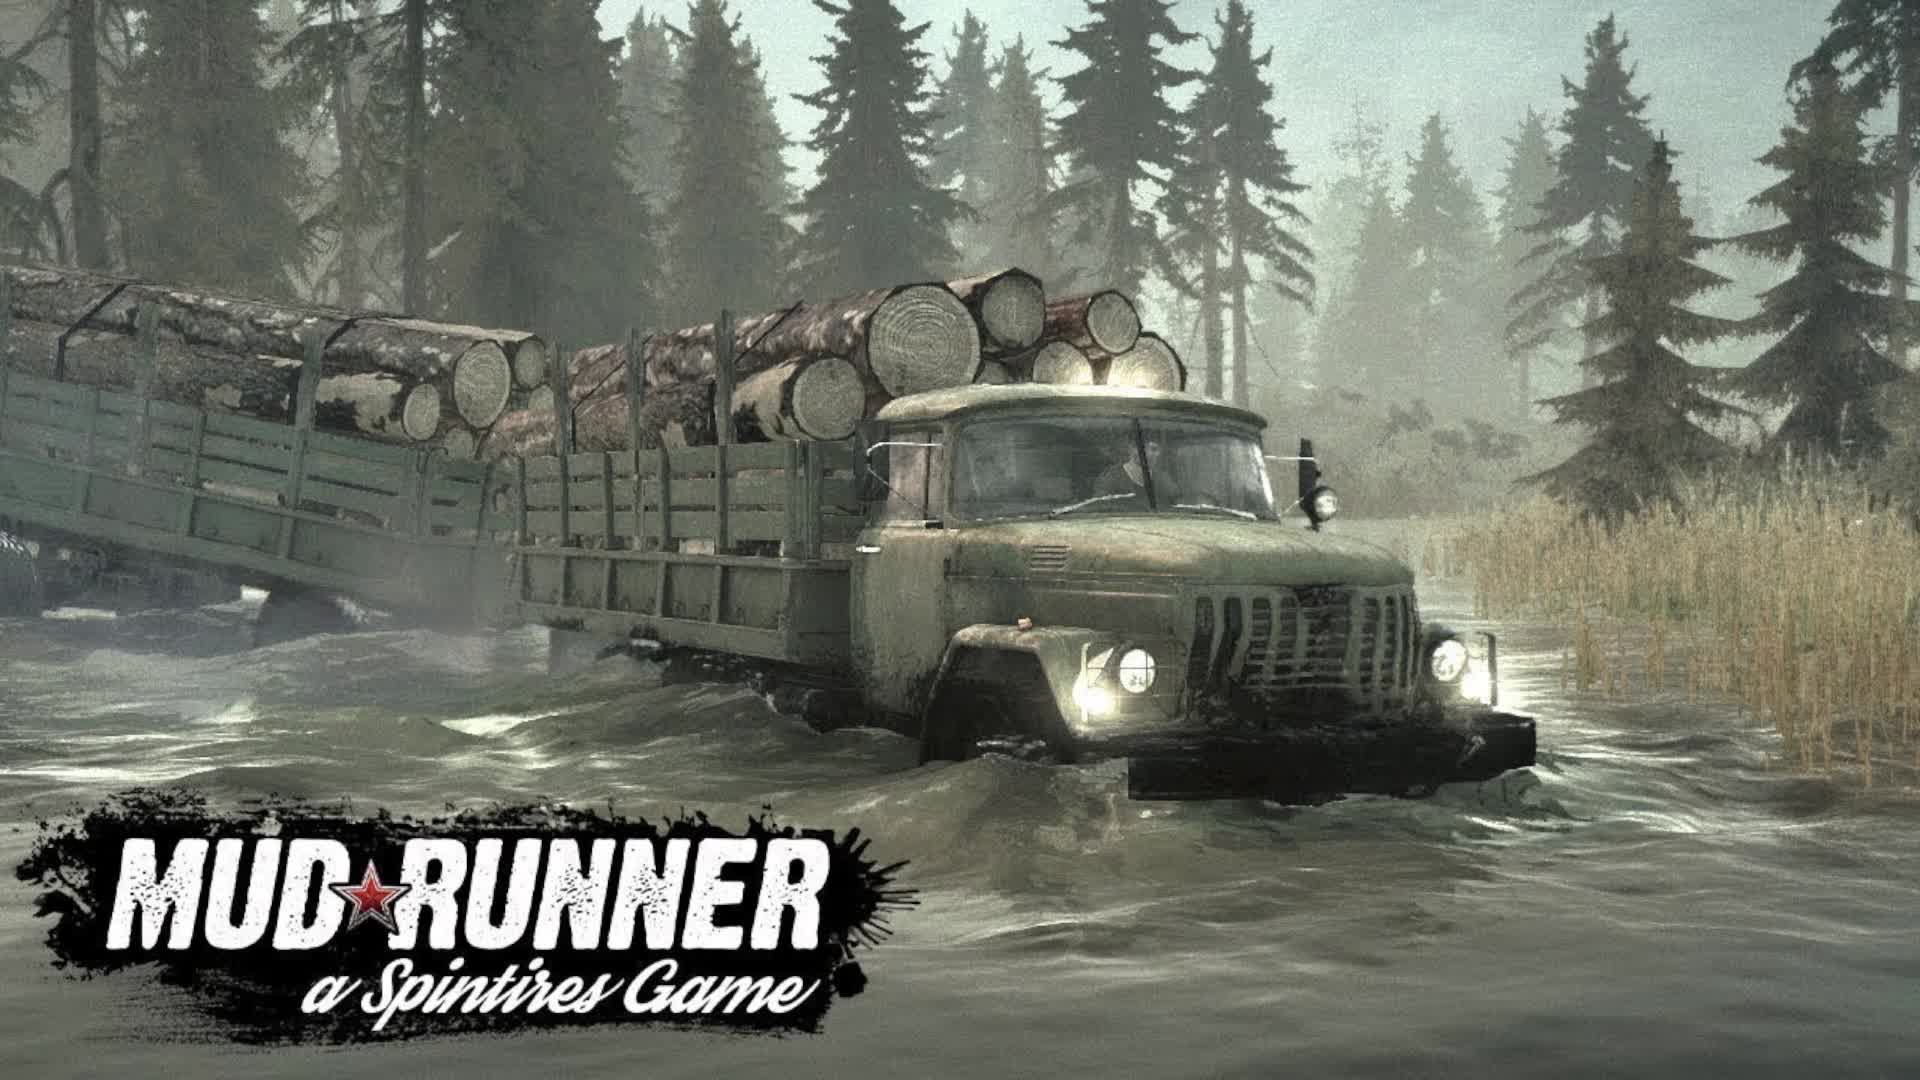 Expeditions a mudrunner game прохождение. Spin Tires MUDRUNNER по сети. Spin Tires: MUDRUNNER стрим. )SPINTIRES: MUDRUNNER по сети на пиратке. MUDRUNNER по сети на пиратке.